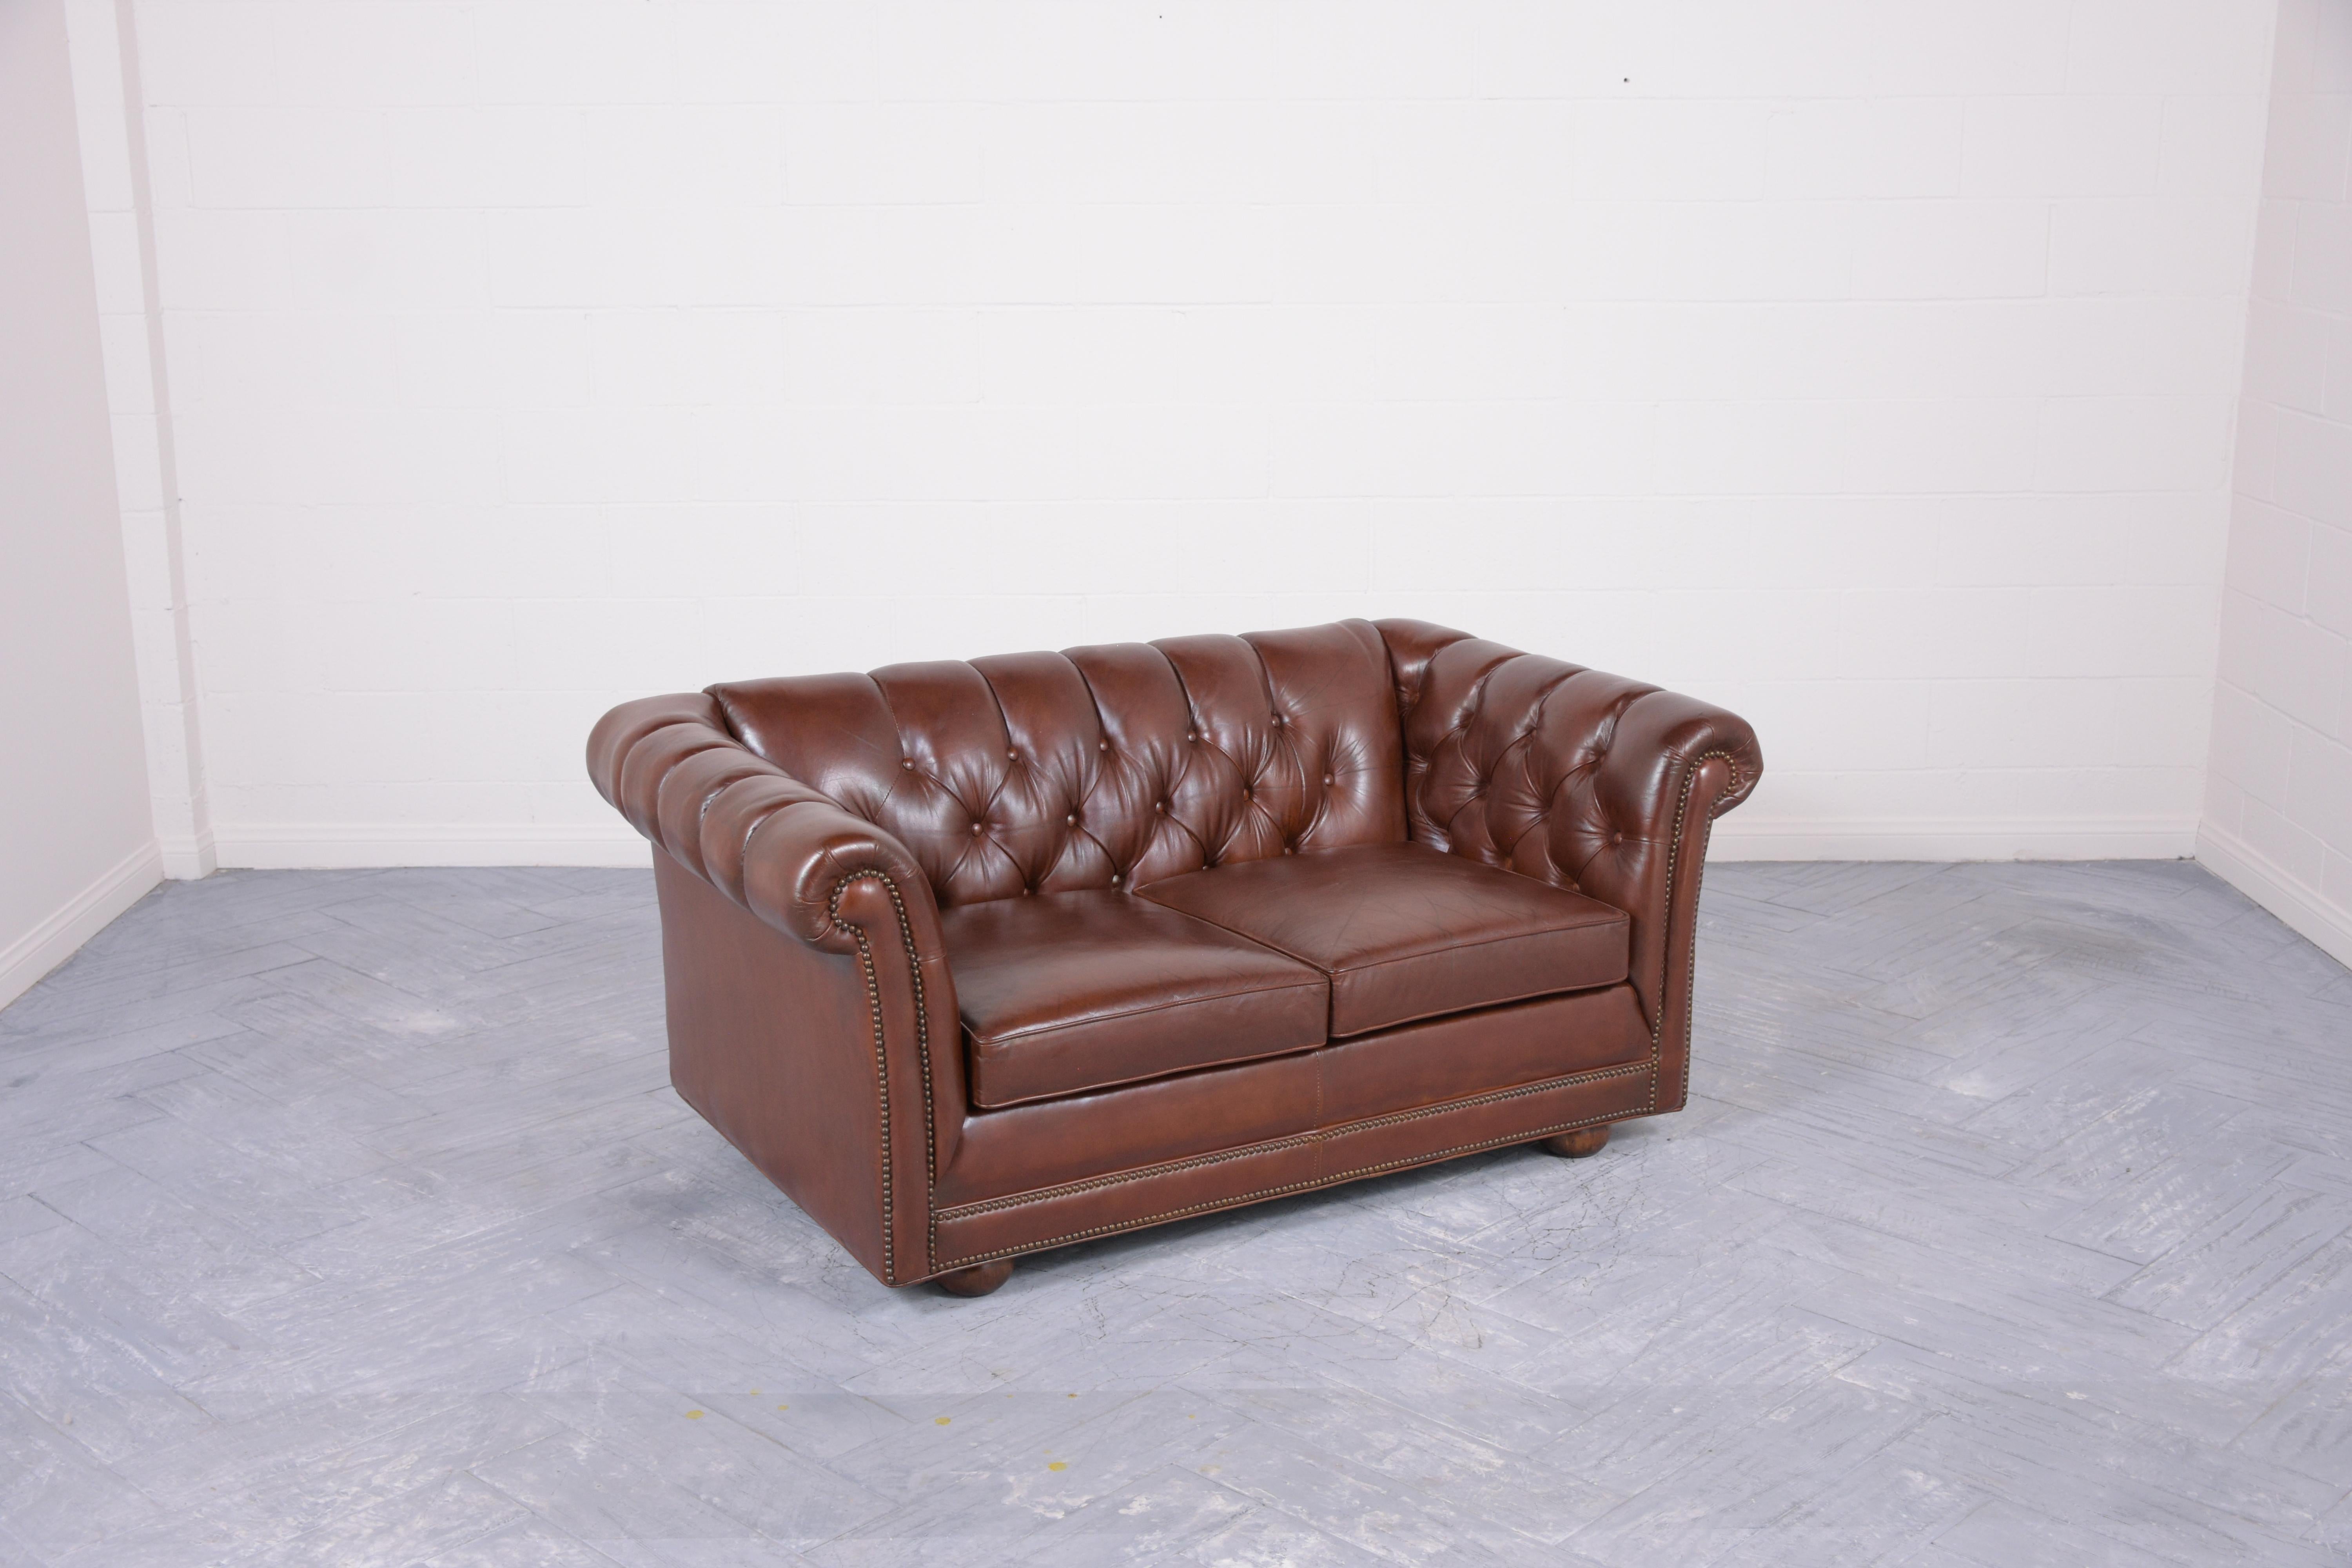 Late 20th Century Vintage Brown Leather Chesterfield Sofa